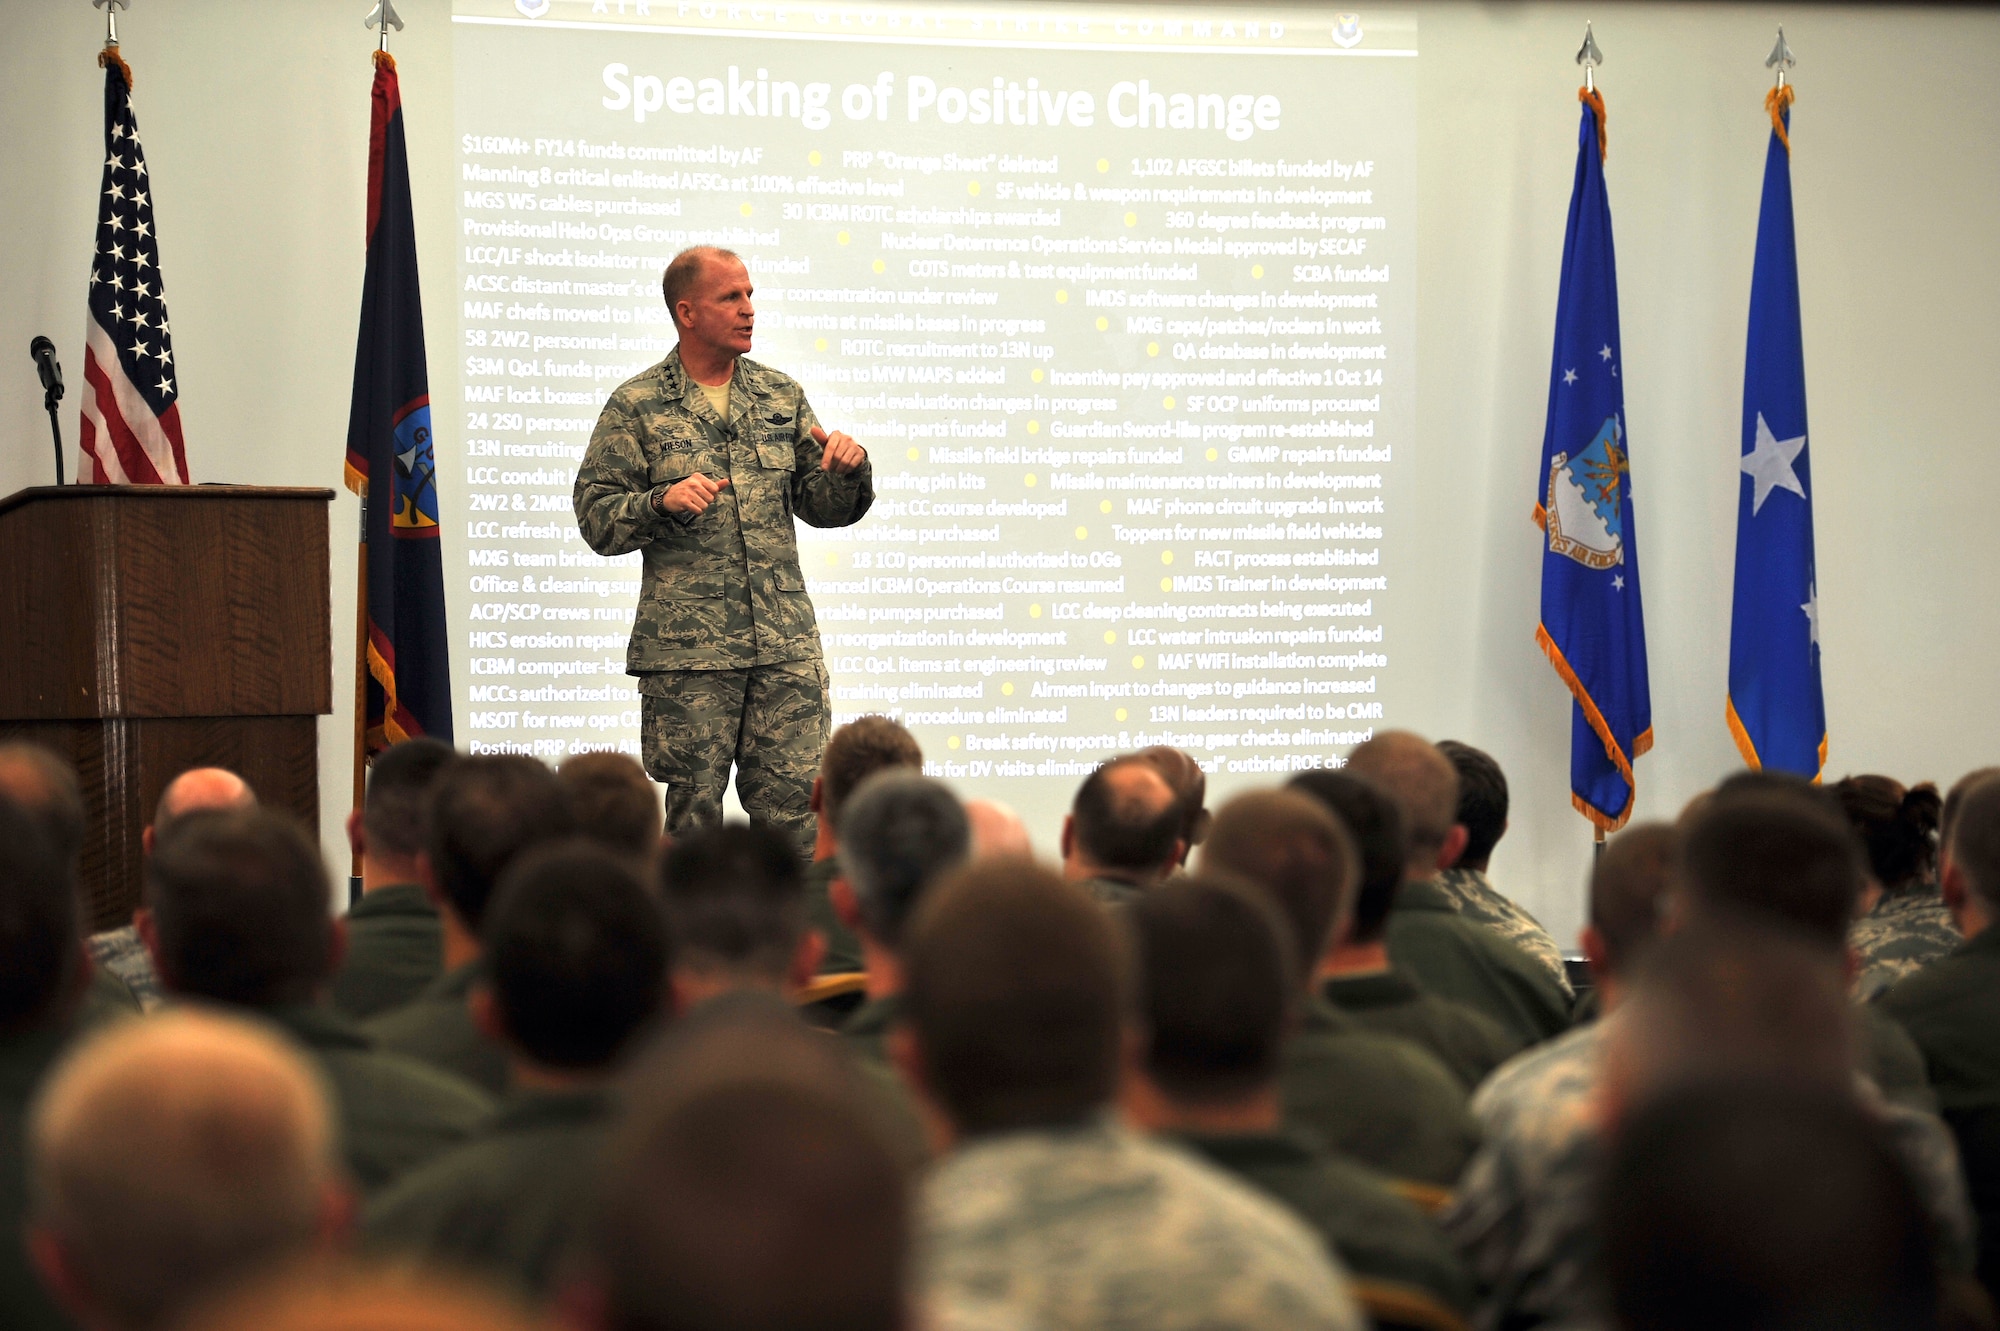 Lt. Gen. Stephen Wilson, commander of Air Force Global Strike Command, addresses nearly 400 deployed Airmen during an all call March 2, 2015, at Andersen Air Force Base, Guam. He provided a command update to the Airmen deployed from Barksdale AFB, La., in support of the Continuous Bomber Presence mission in the Asia-Pacific region. (U.S. Air Force photo by Staff Sgt. Melissa B. White/Released)